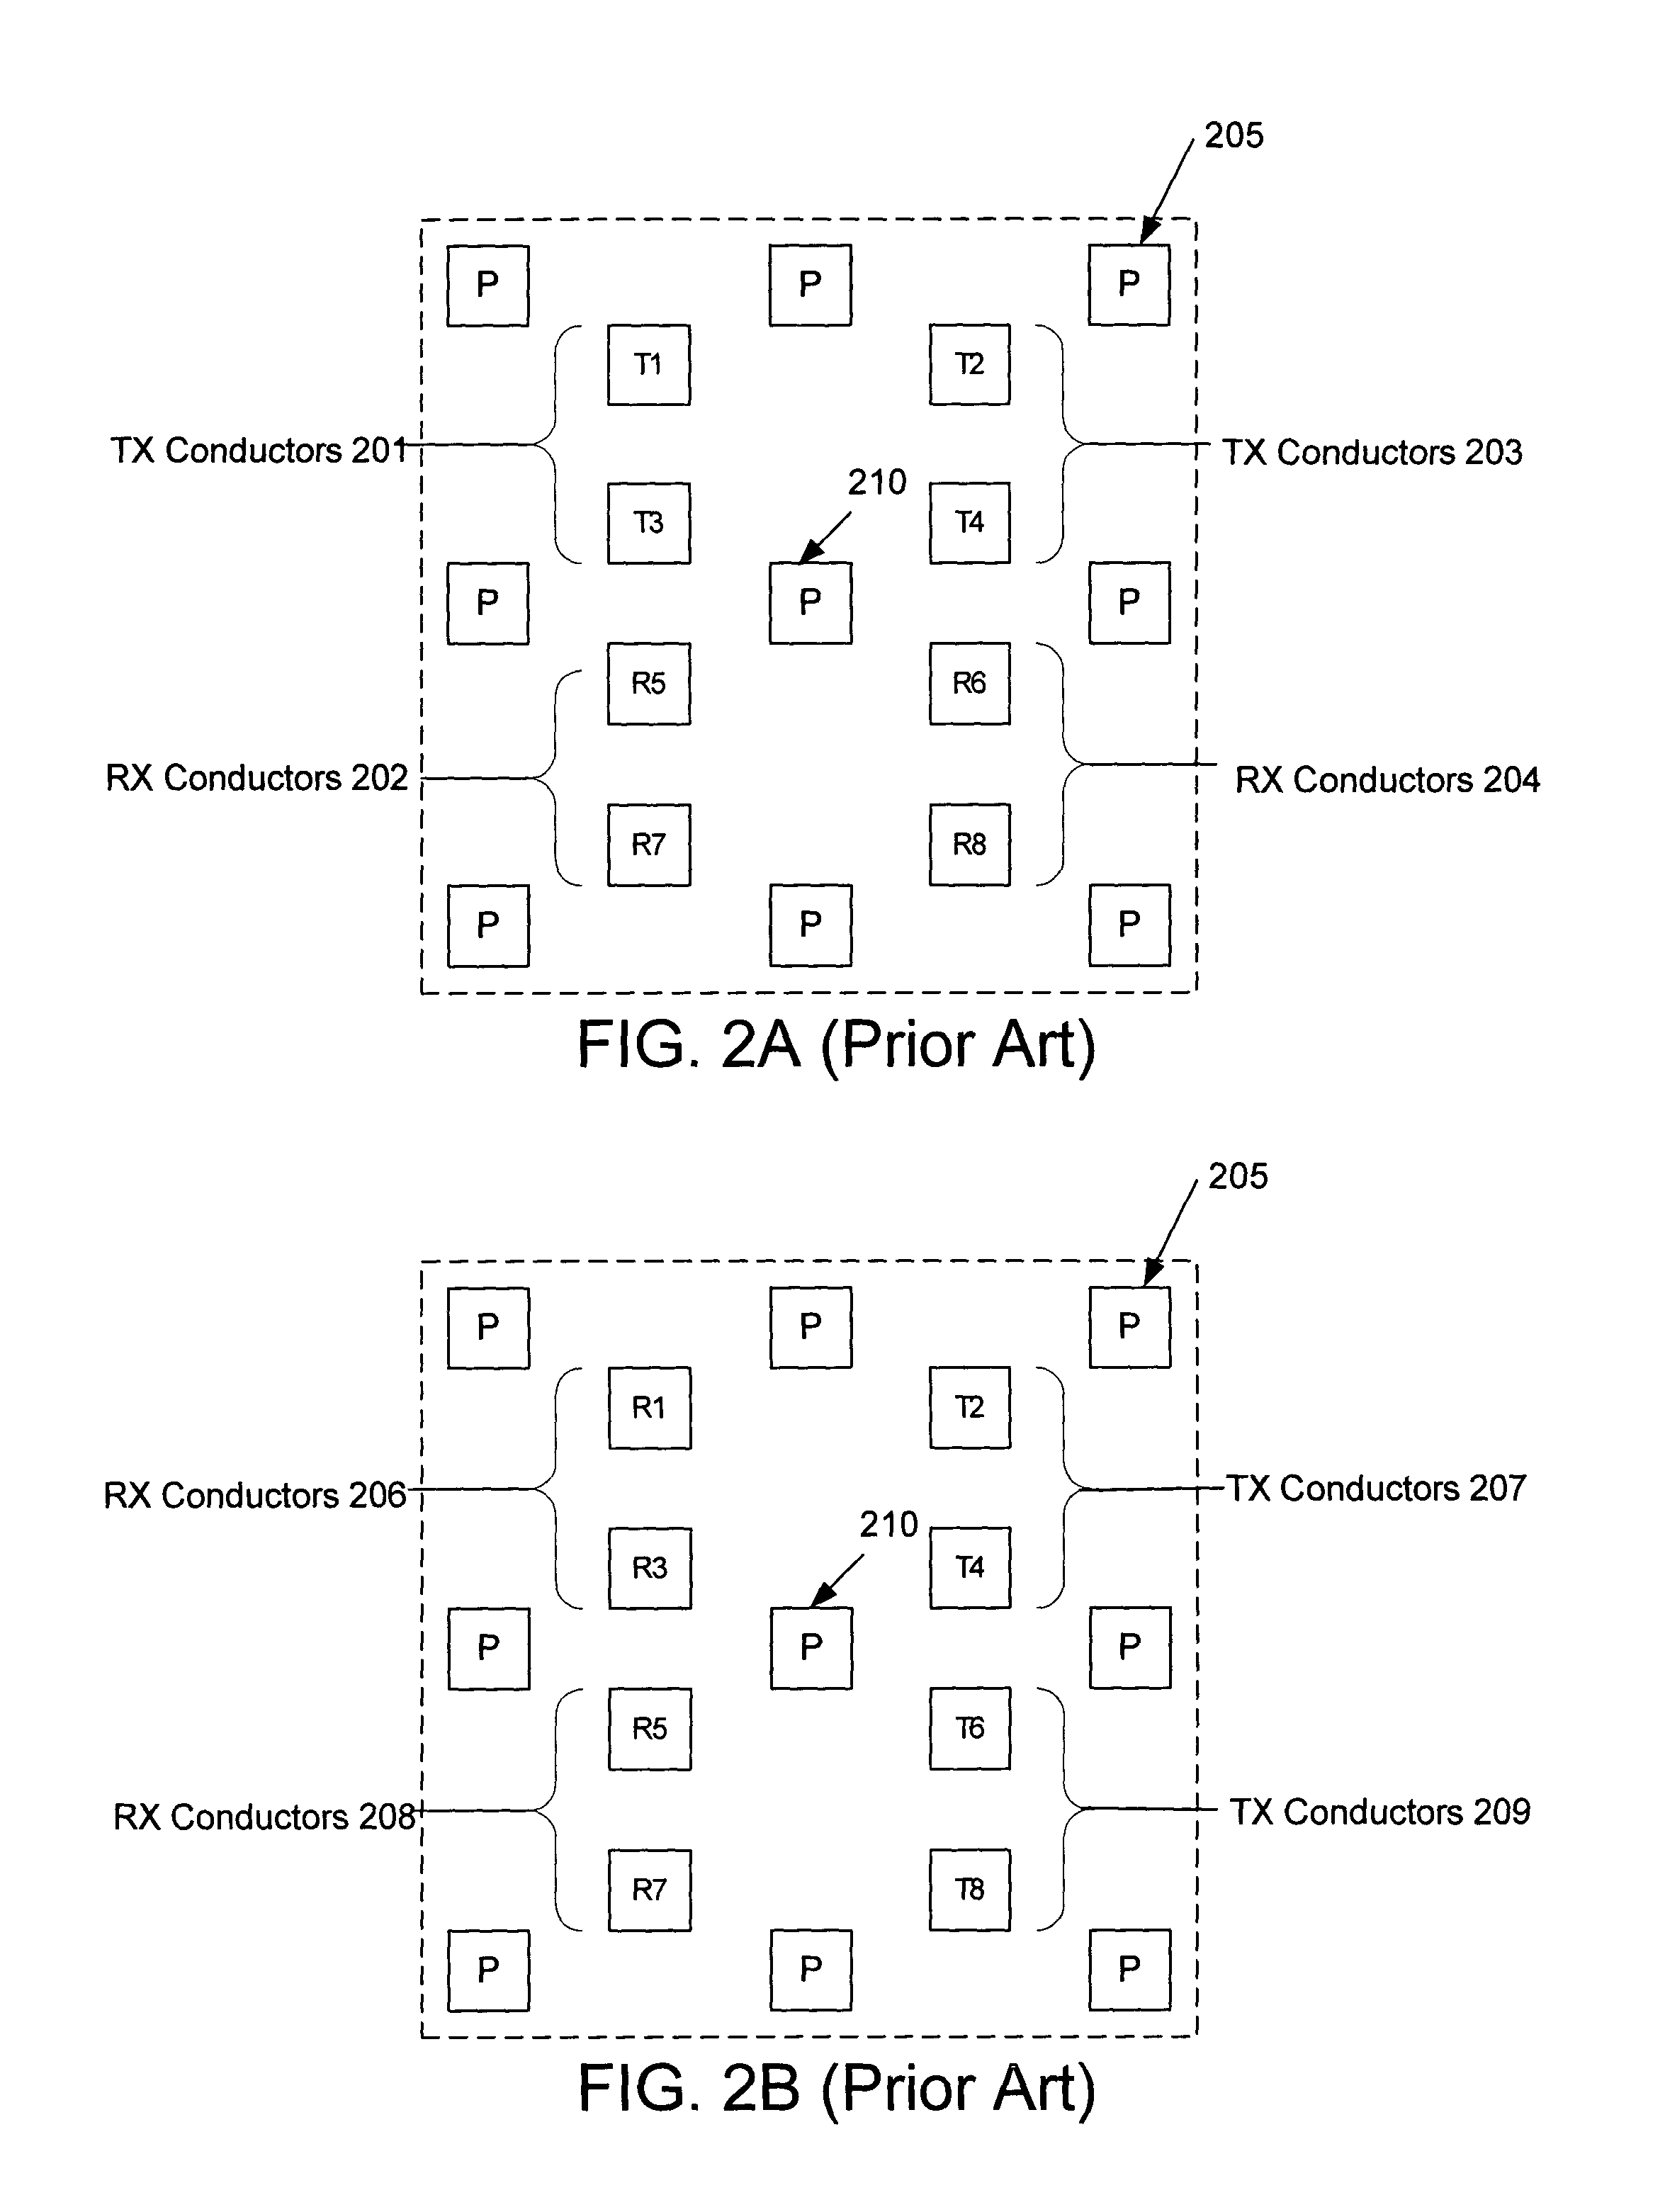 Apparatus and method to reduce signal cross-talk